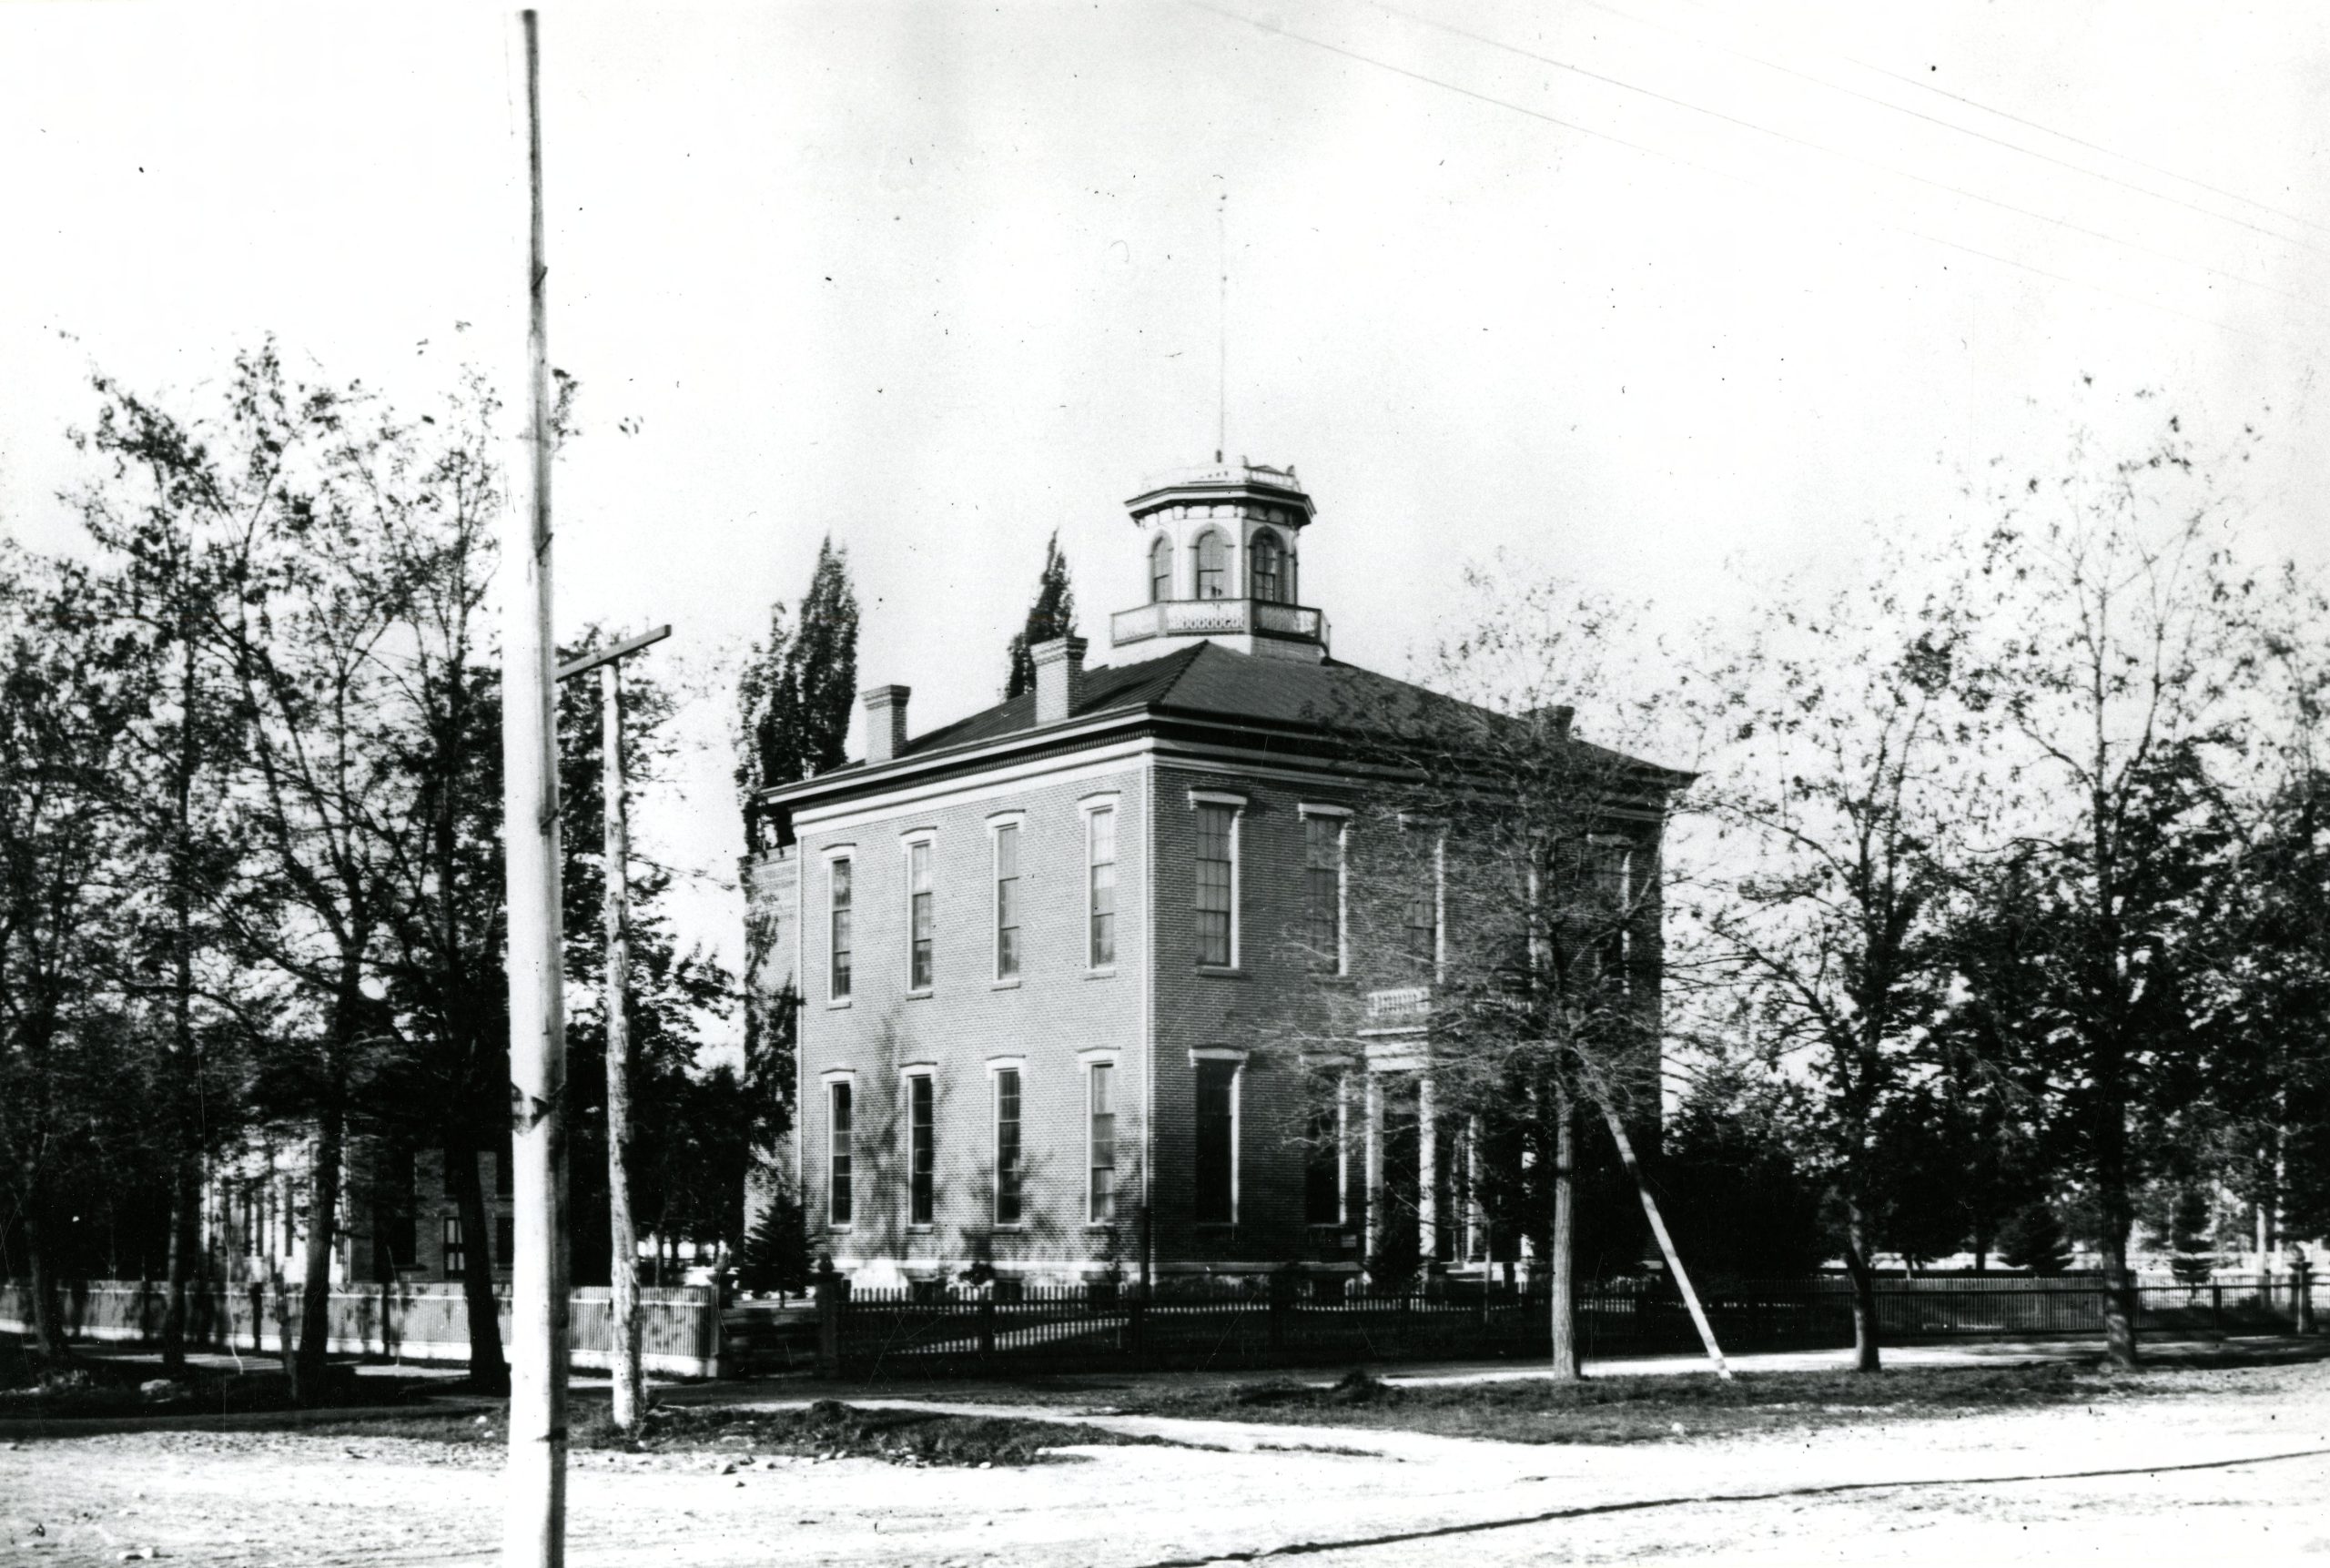 The Utah County Courthouse, built in the early 1870s, was shared by the district court, Utah County, and Provo City until the 1920s.